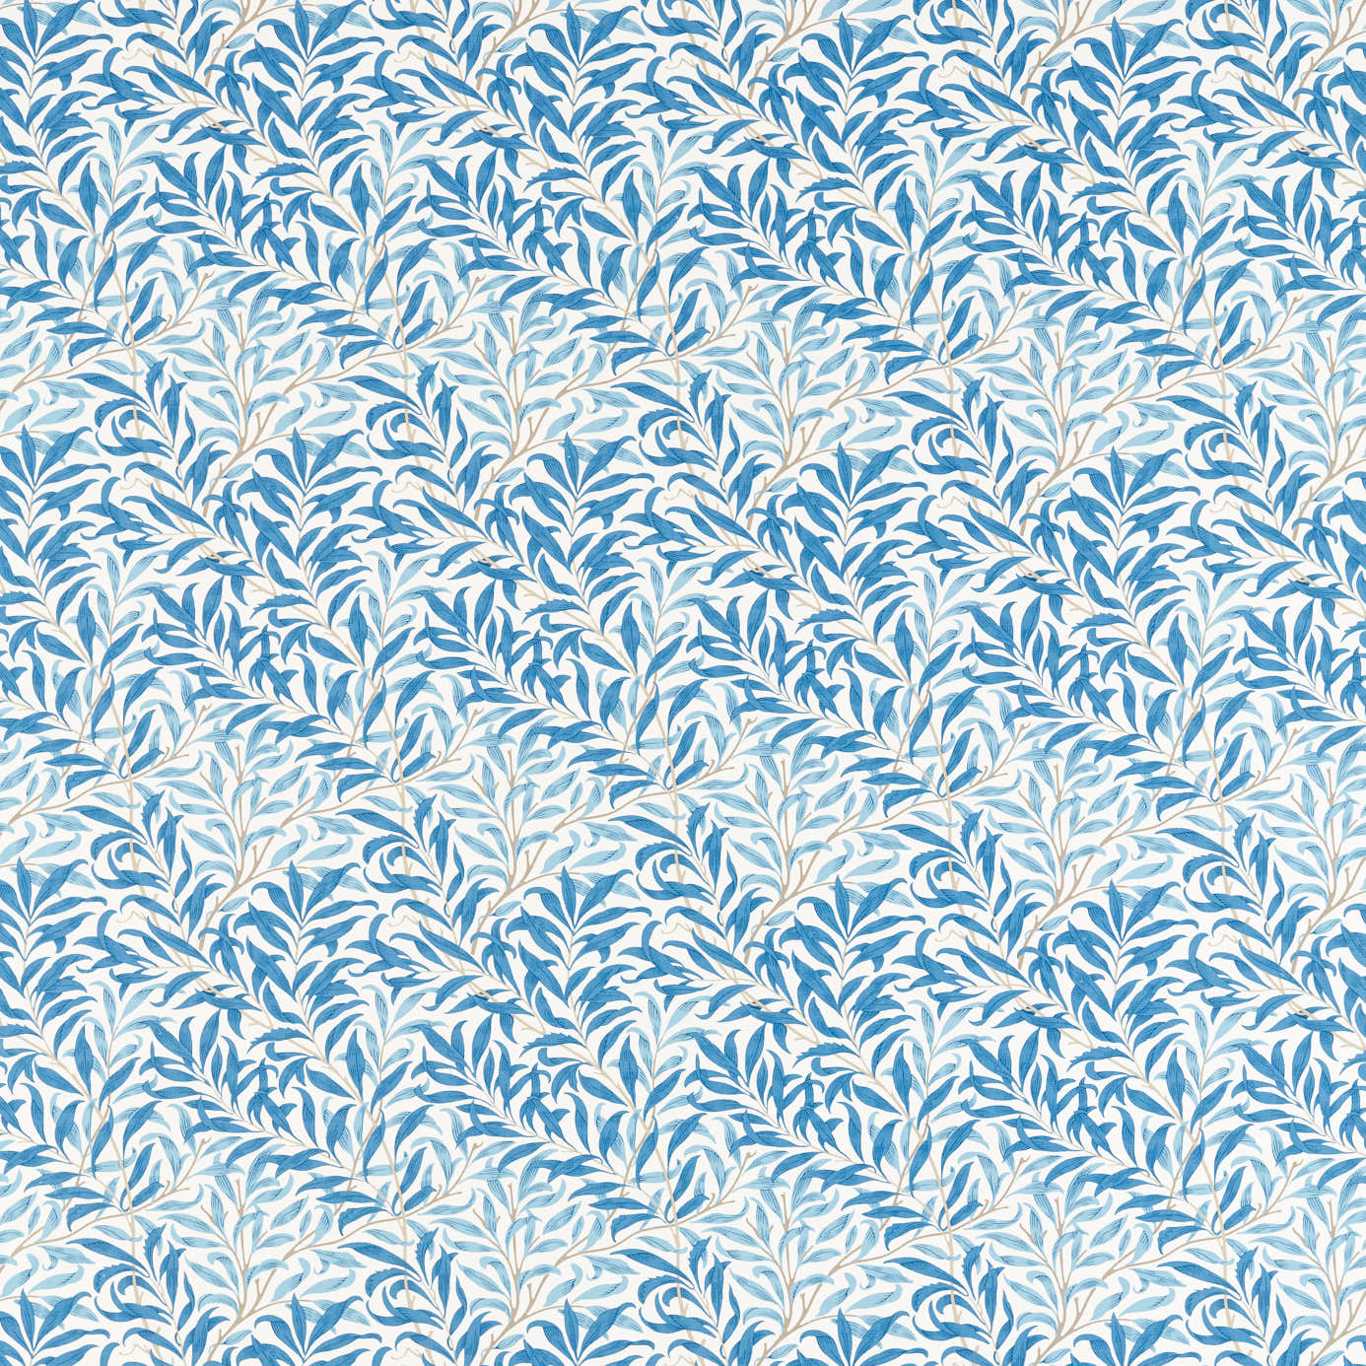 Willow Bough Woad Fabric By Morris & Co